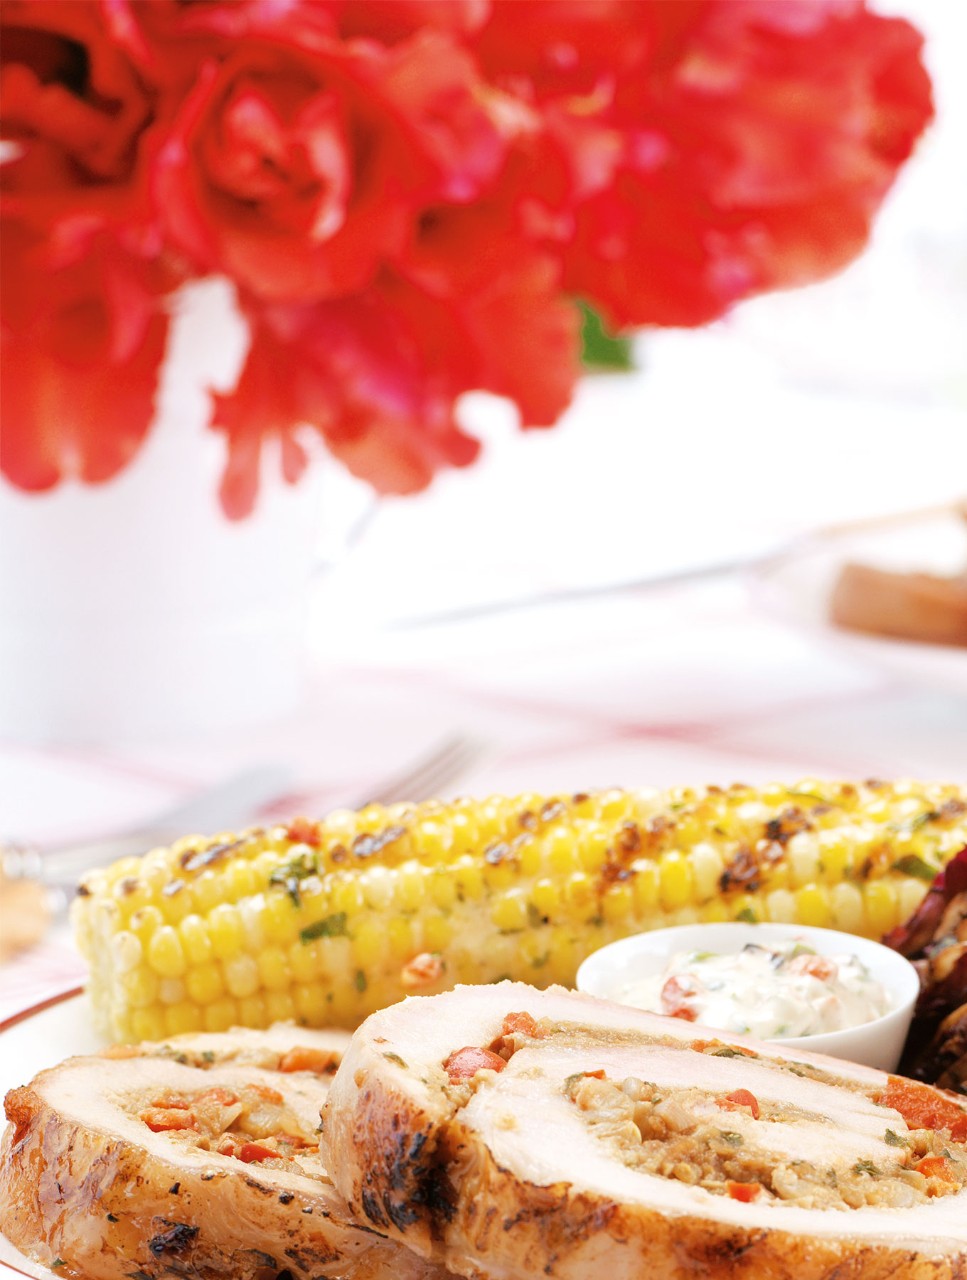 Grilled Corn On The Cob with Roasted Red Pepper Mayonnaise